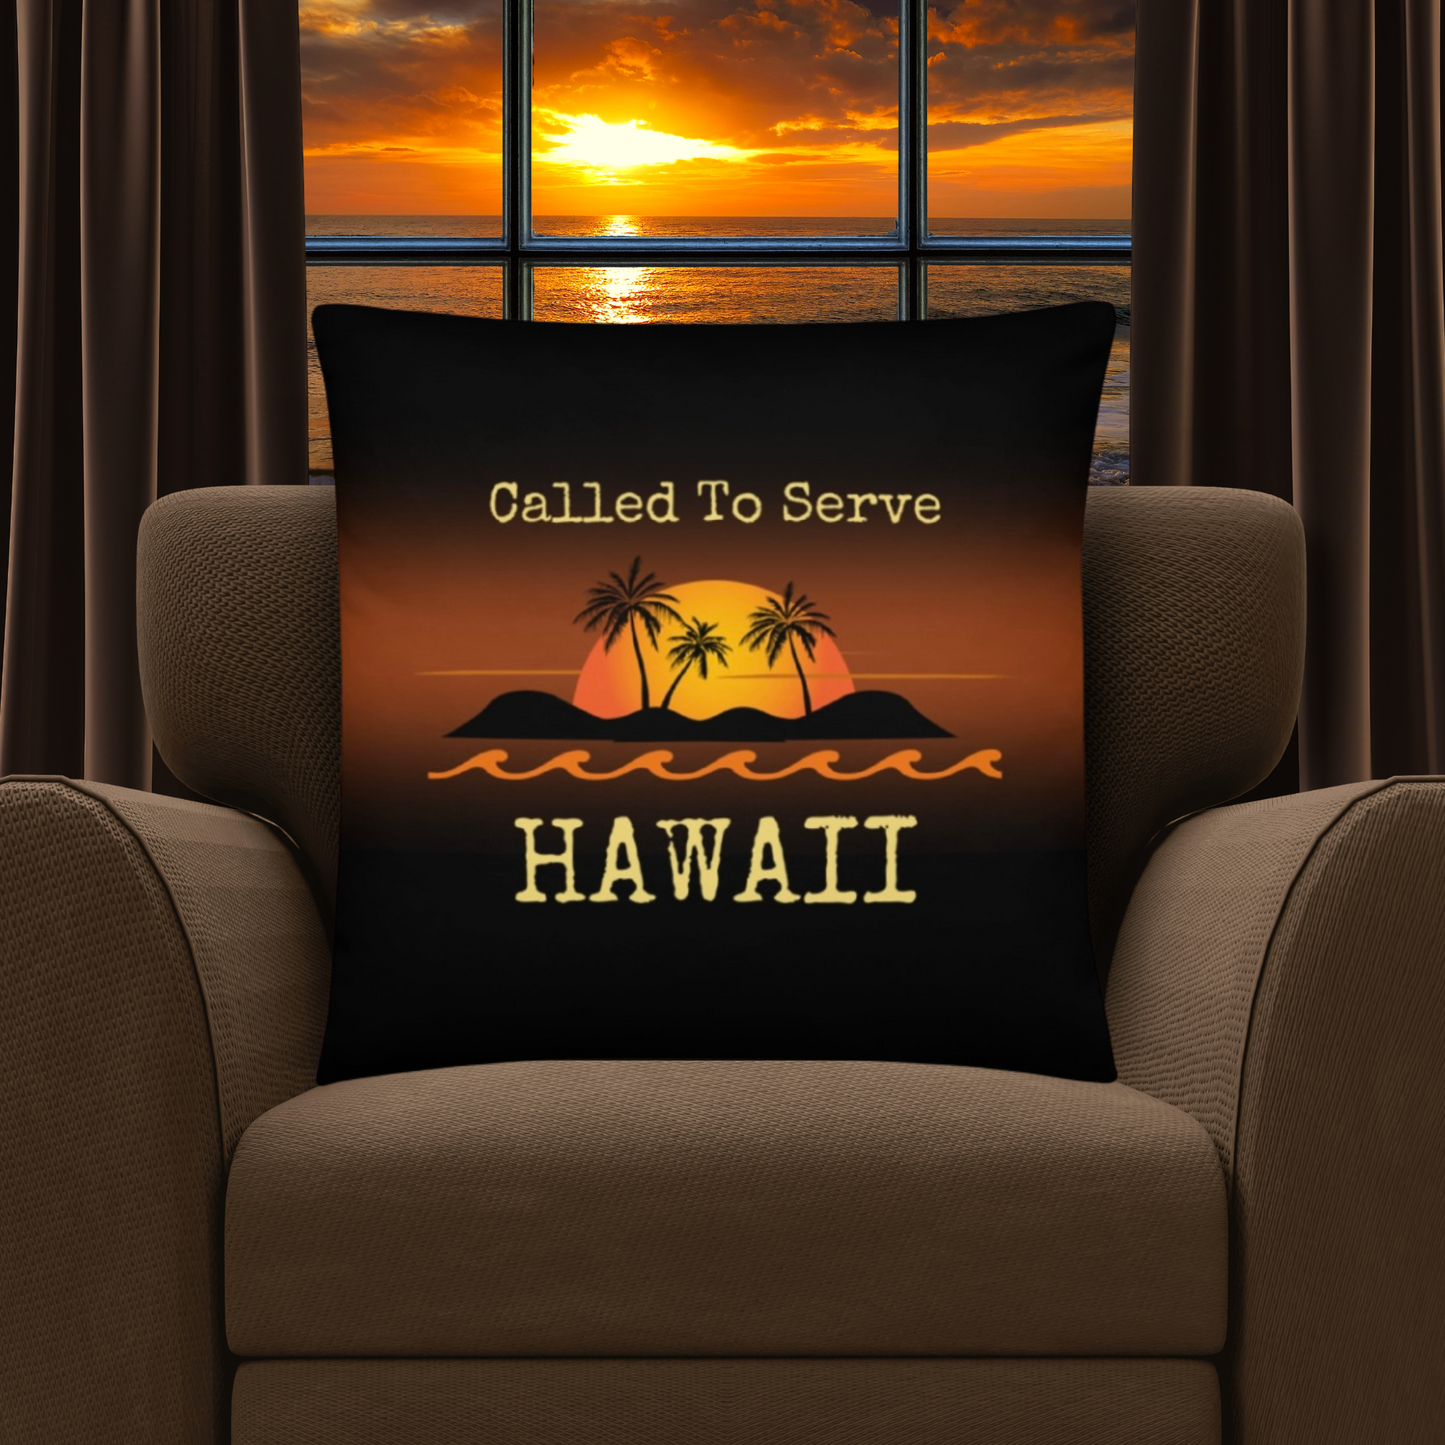 Hawaii Missionary Gift #1 | Best Missionary Gift Ideas | Mission Call Gifts | Called to Serve Gifts | Missionary Mom Gifts | Best Latter Day Saint Gifts | LDS Missionary Gifts | Hawaii Home Decor